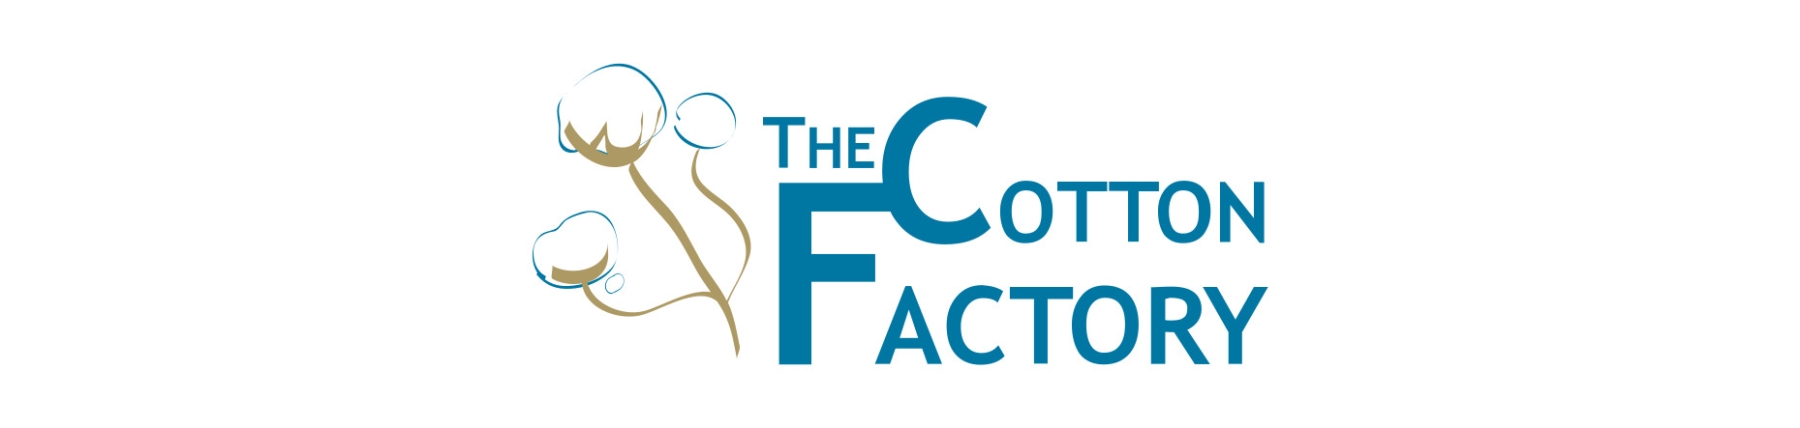 the-cotton-factory